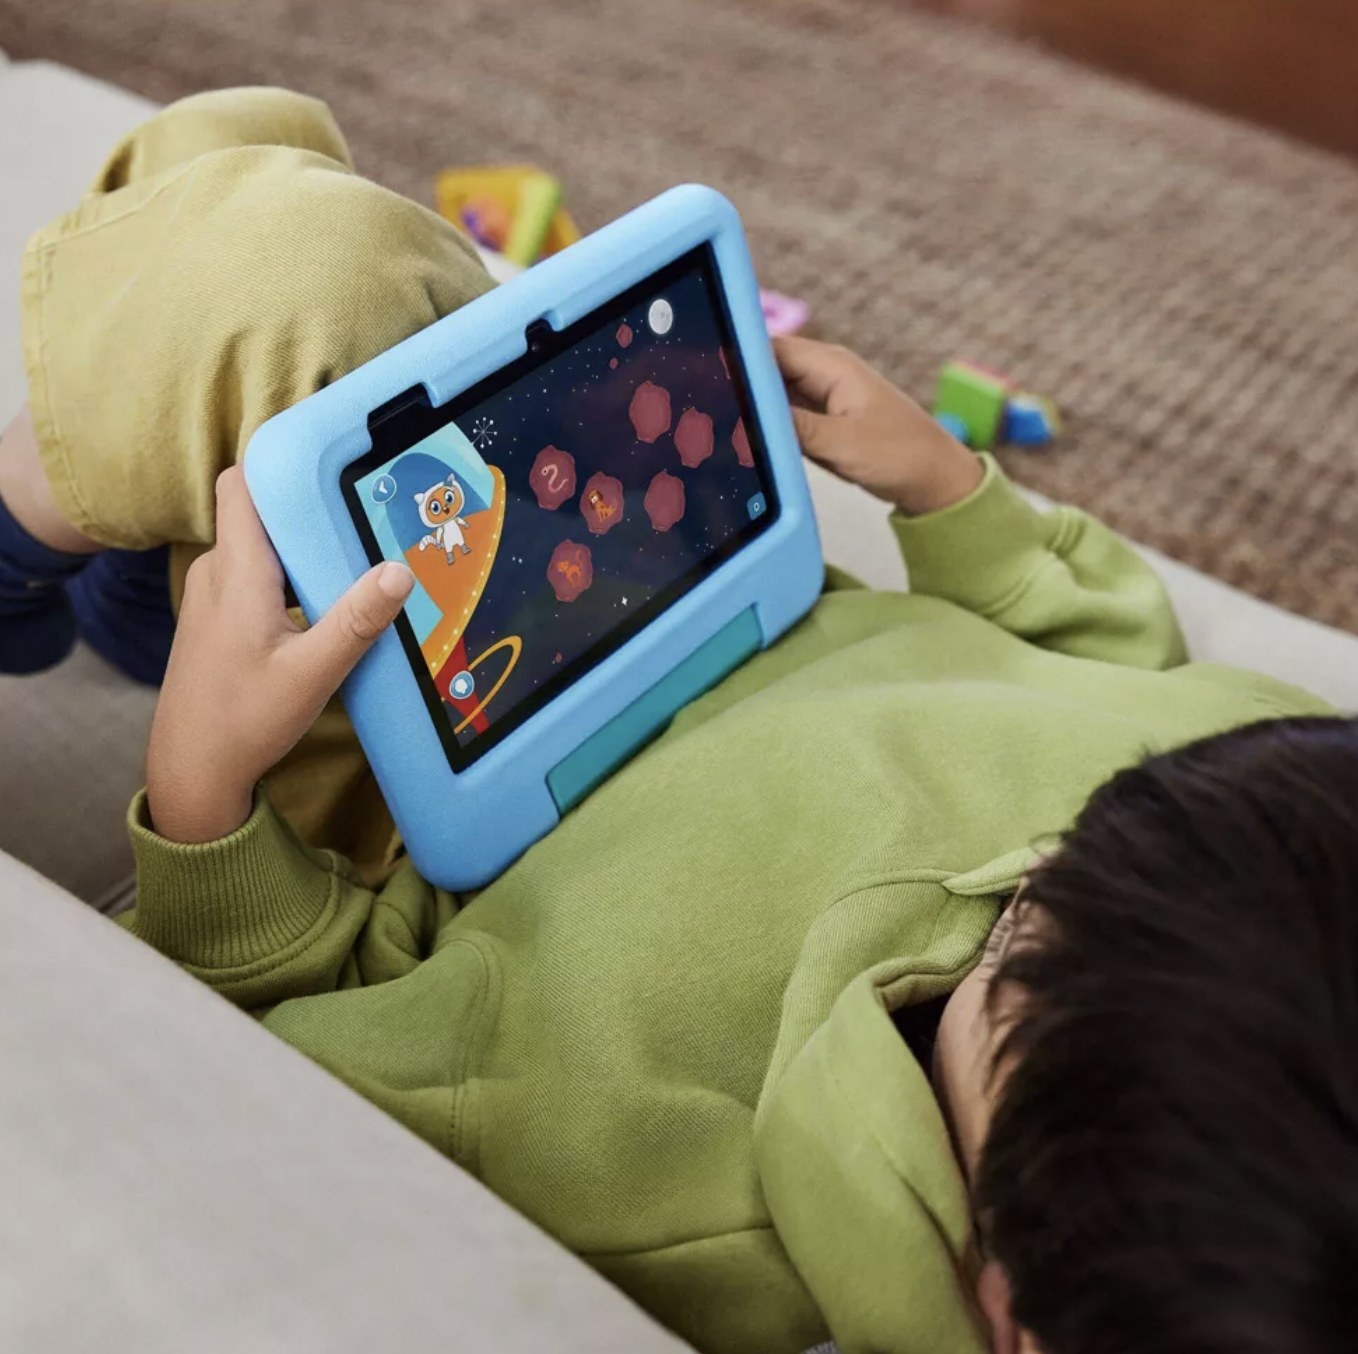 child playing game on the touchscreen blue tablet